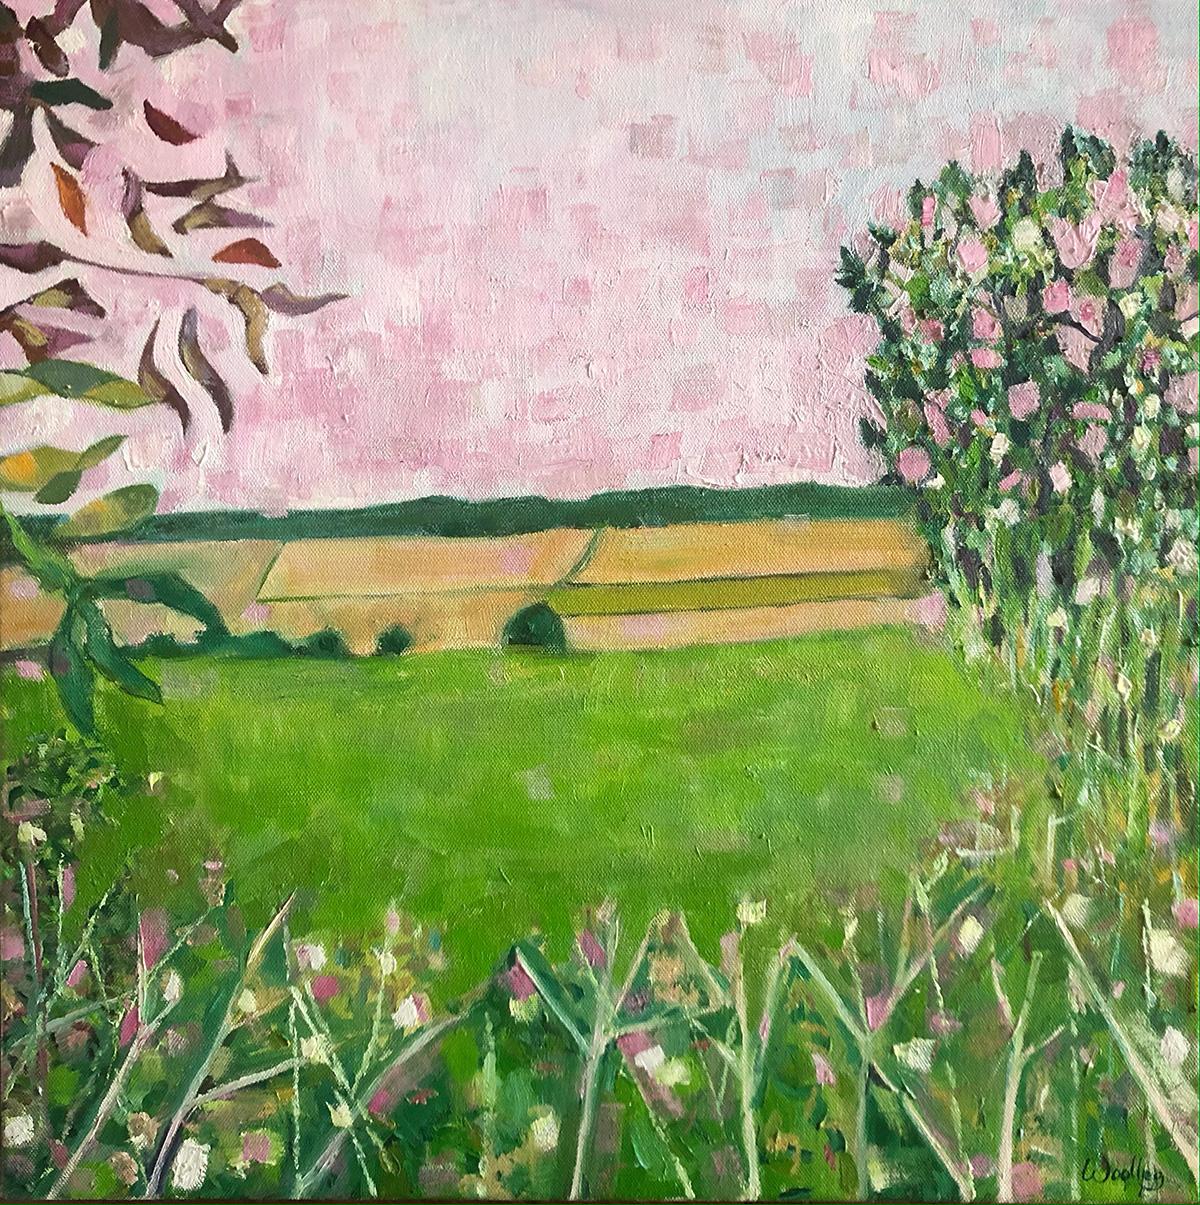 Towards Stow by Eleanor Woolley, Contemporary art, Impressionist painting 